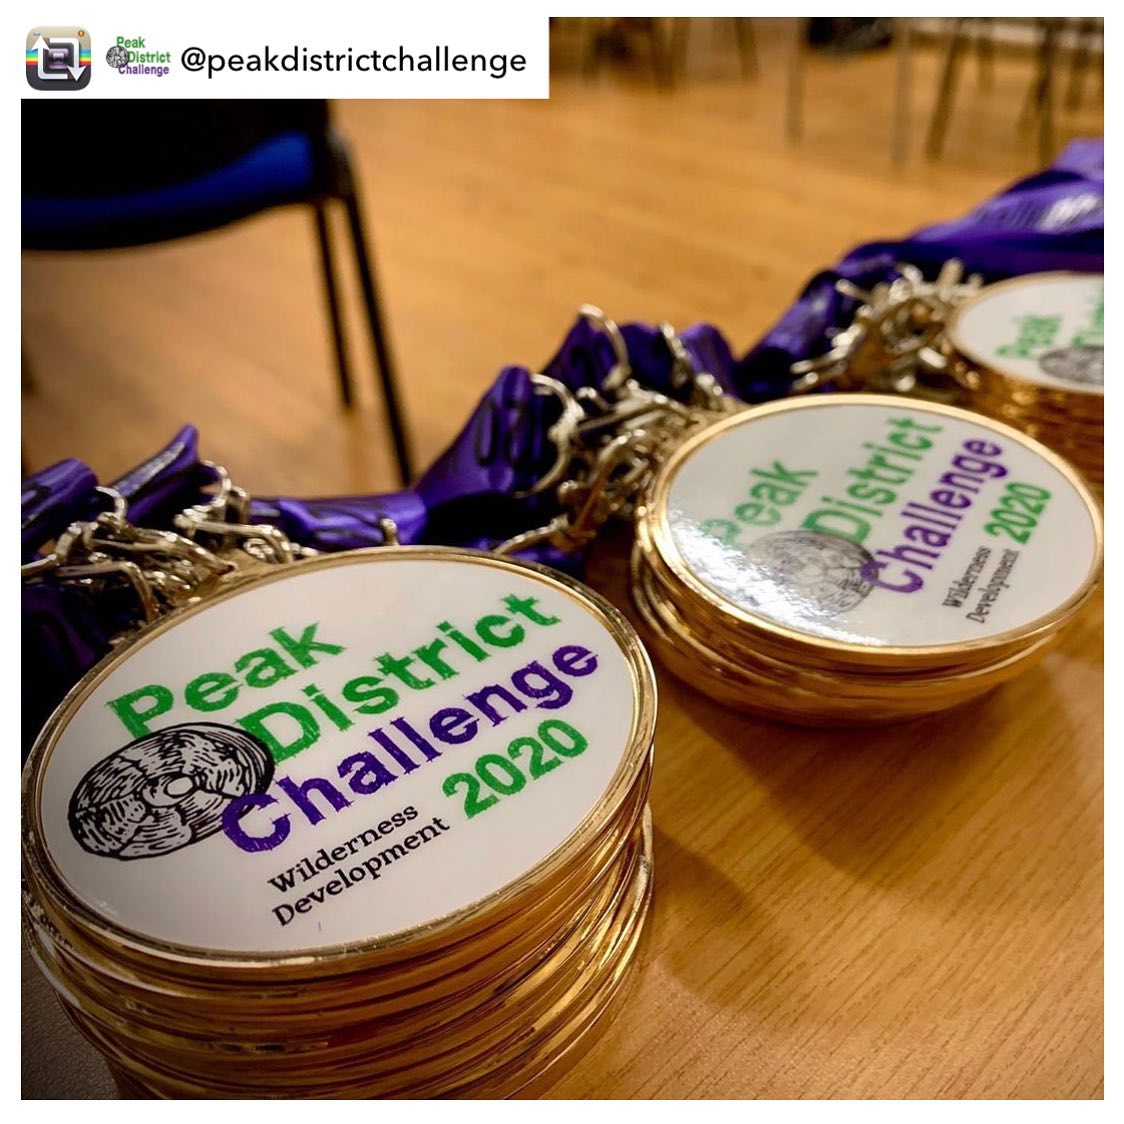 Repost from @peakdistrictchallenge - Our first wave of challengers have left and we’re getting everyone’s medals ready for tomorrow 🏅⛰🏅 
.
.
.
#wildernessdevelopment #peakdistrictchallenge #medals #ukhikes #hikebritain #peakdistrictchallenge2020 #originalpeakdistrictchallenge #since2013 #ultrarunning #ultratrailrunning #trailrunning #ultrarunners #challengeevent #challengeyourself #challengetrek #charityevent #peakdistrict #peakdistrictnationalpark #yourhikes #roamtheuk #hikingadventures #ukhikingofficial #hikinguk #mountainsfellsandhikes #mapmyhike #igersderbyshire #outdoorhikingculture #nationalparksuk